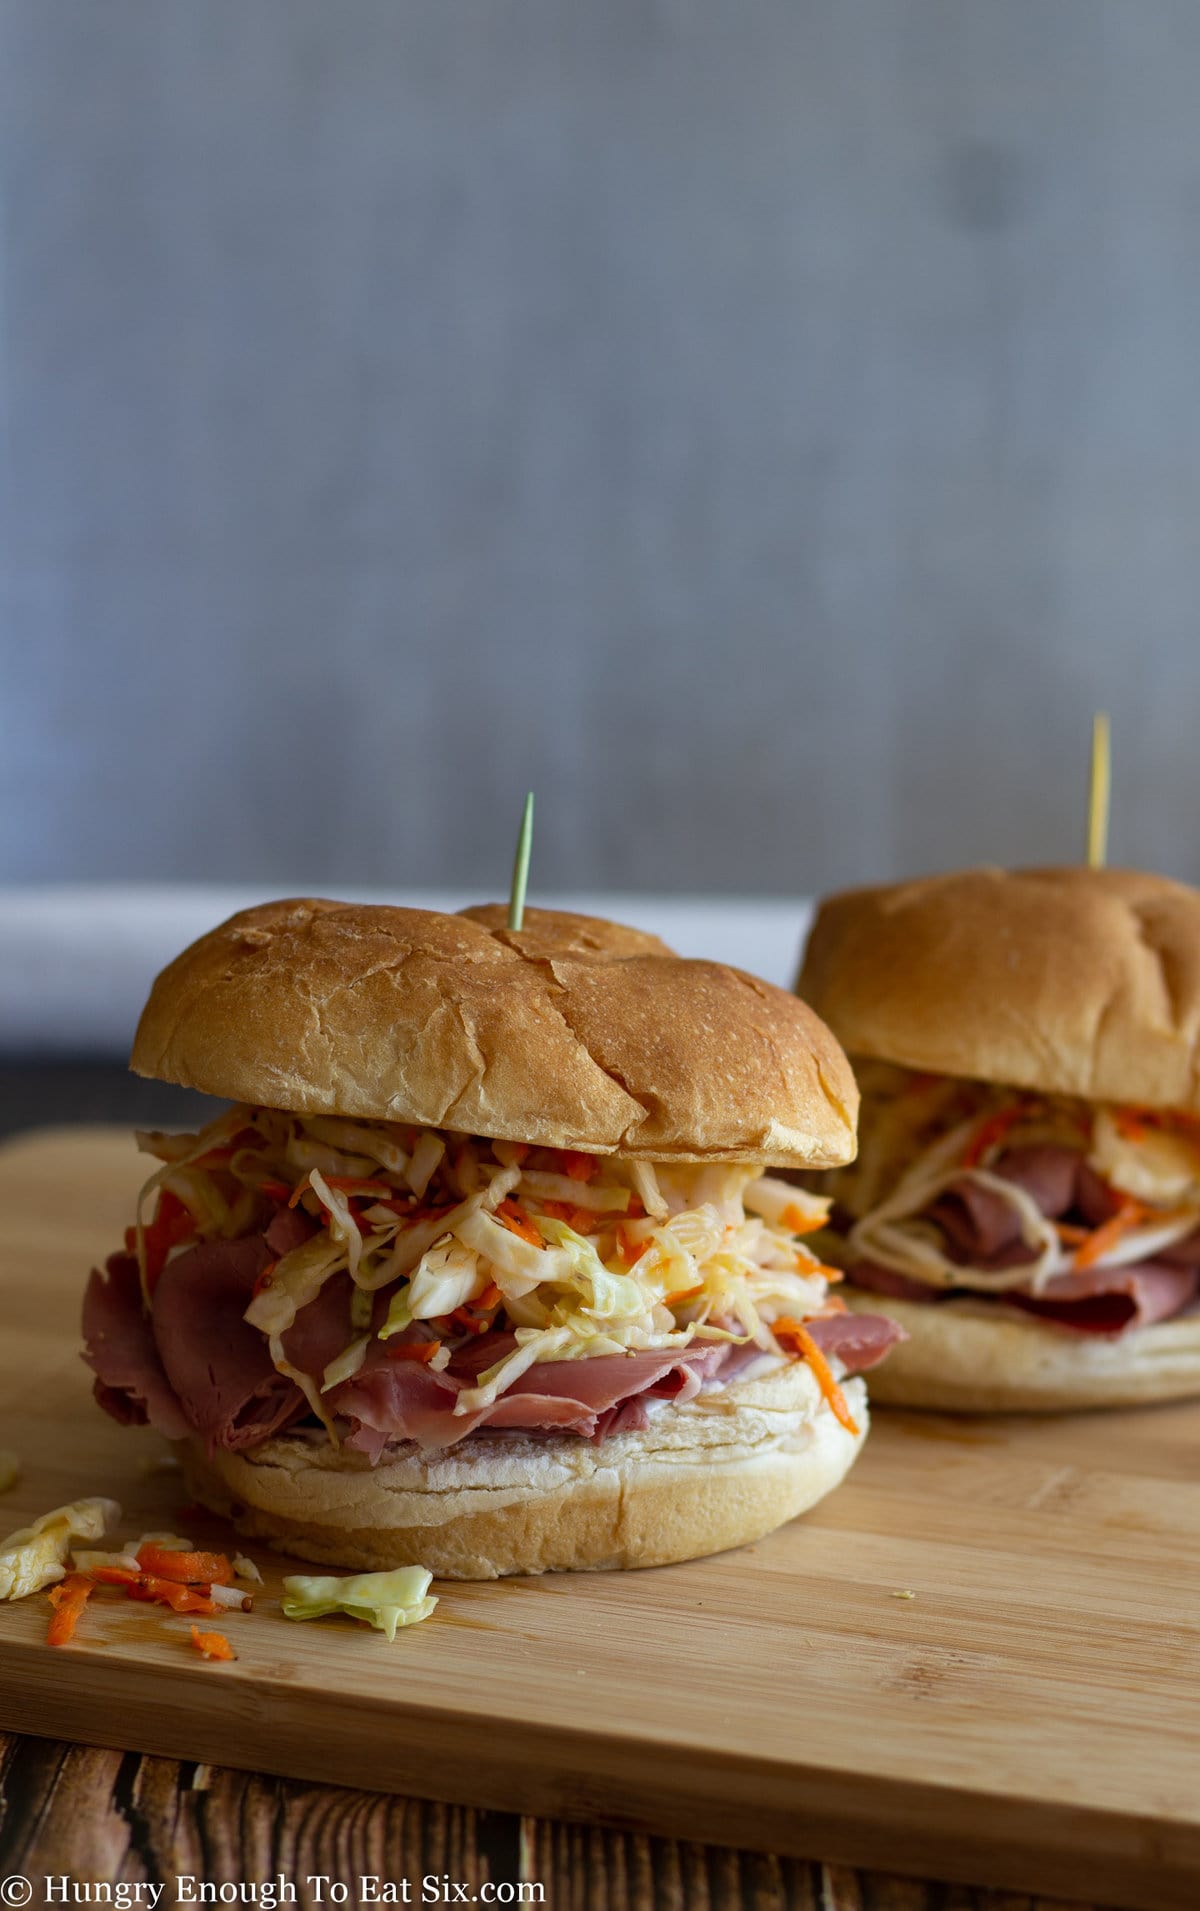 Corned beef sandwiches with slaw on potato rolls.